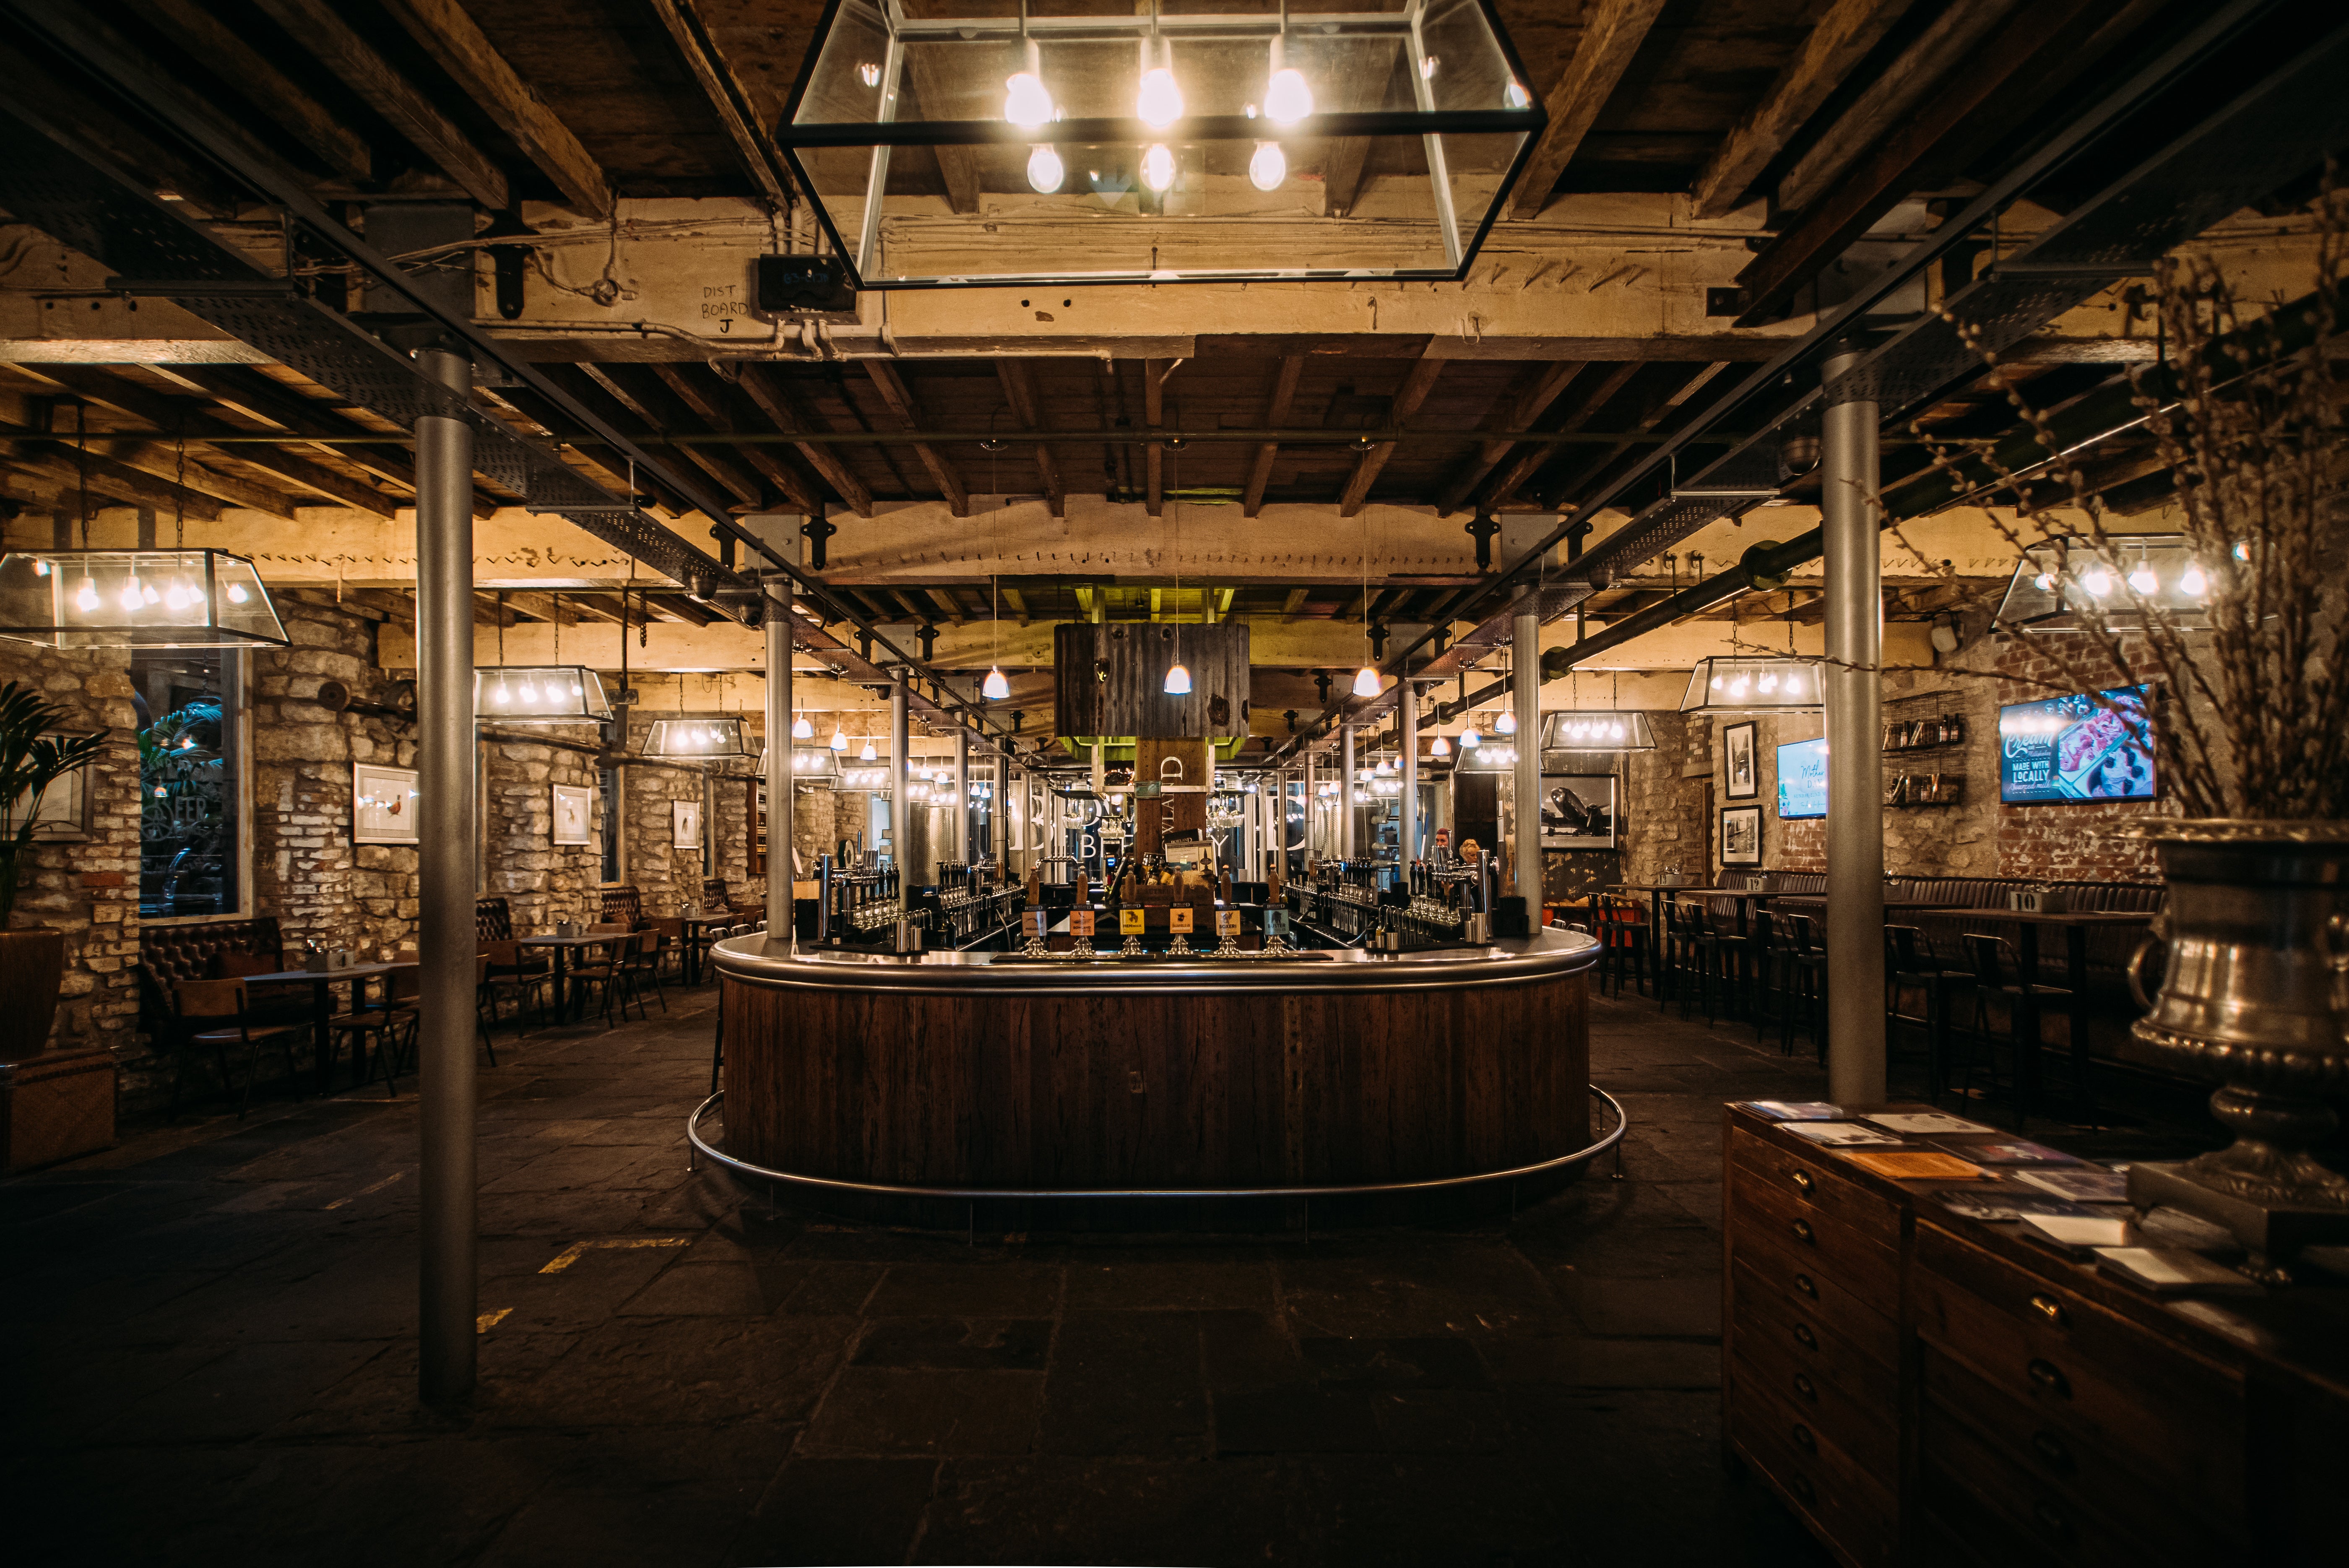 Bowland Brewery Beer Hall showcases brewers’ products